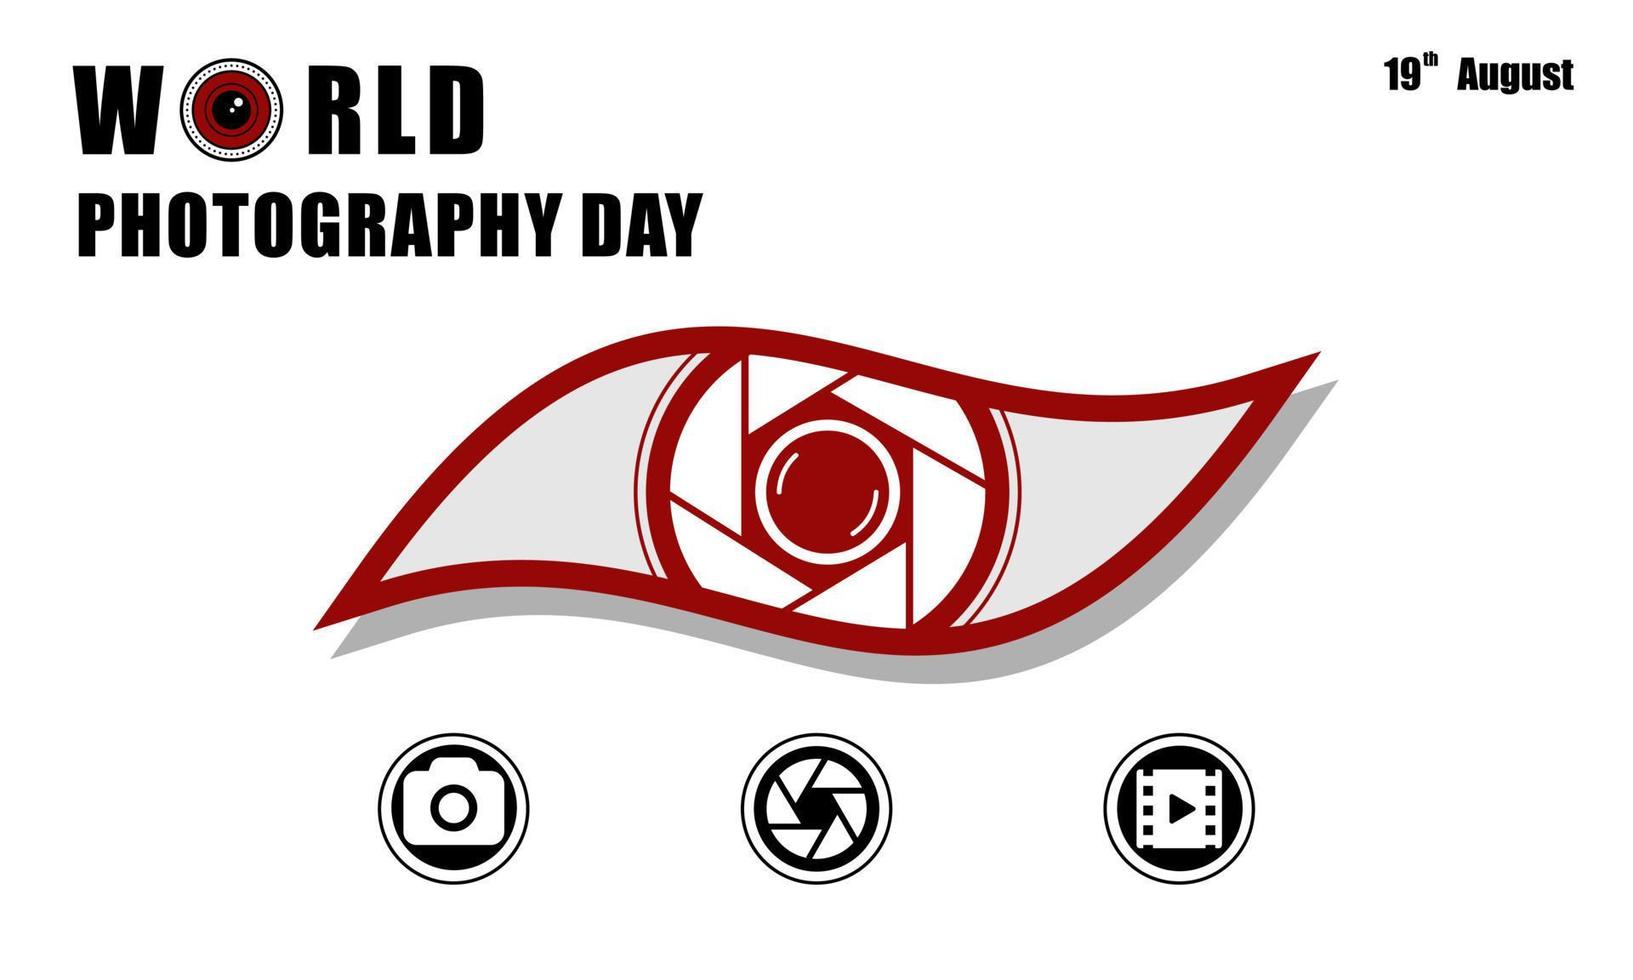 world photography day, perfect design with lens, vector illustration and text.